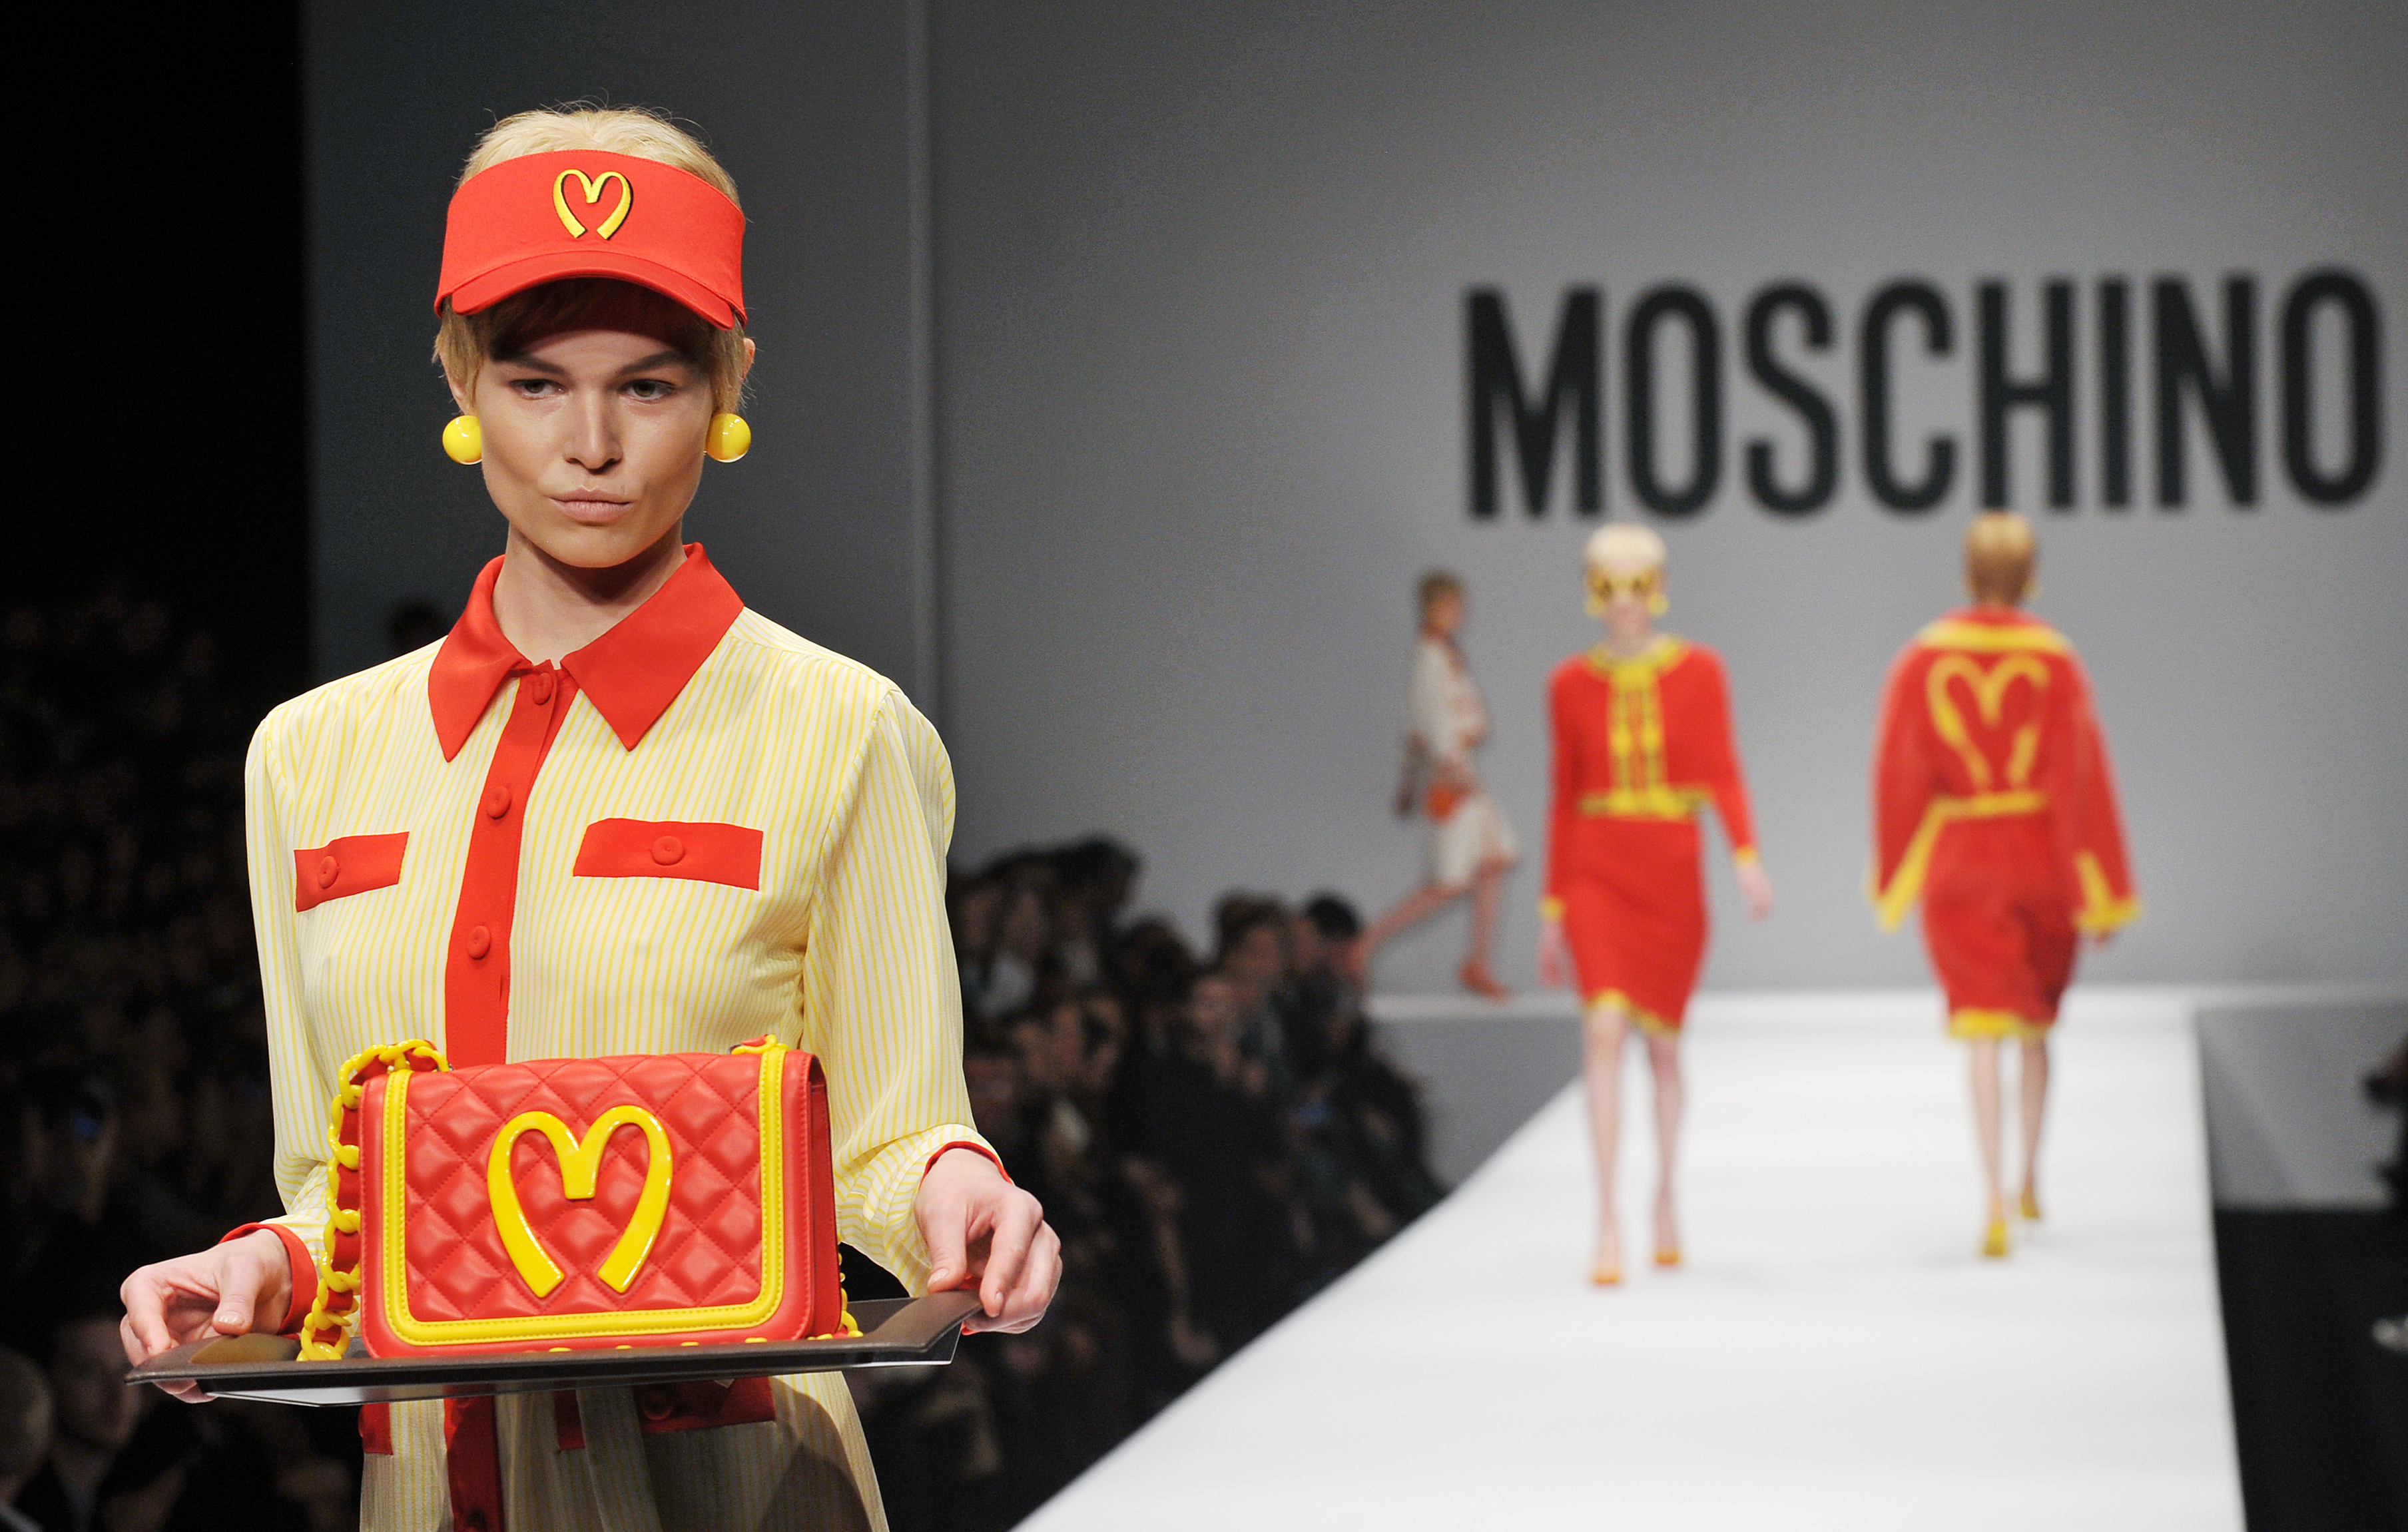 Moschino's Cheap & Chic Label Has Now Been Renamed As Boutique Moschino